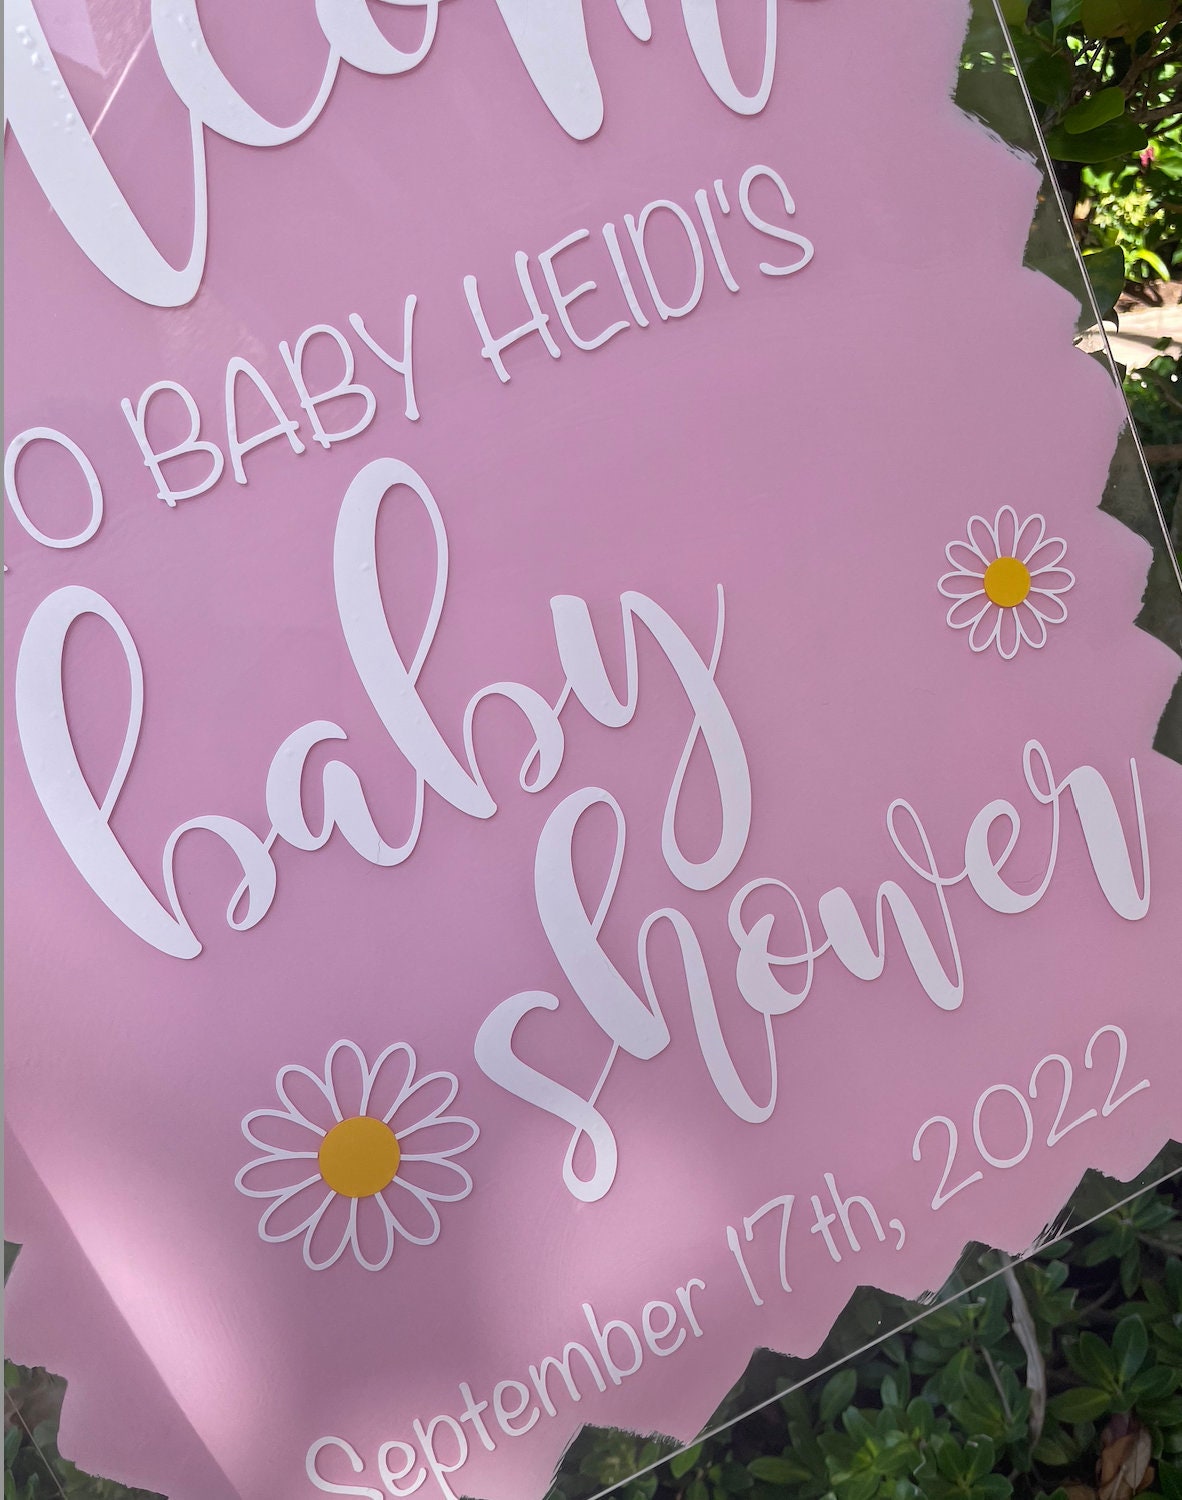 Baby Shower welcome sign,acrylic sign, clear acrylic sign, baby shower  signage, Back Painted Acrylic,Baby Shower sign,Custom baby shower – Avrit  Oliver Designs LLC